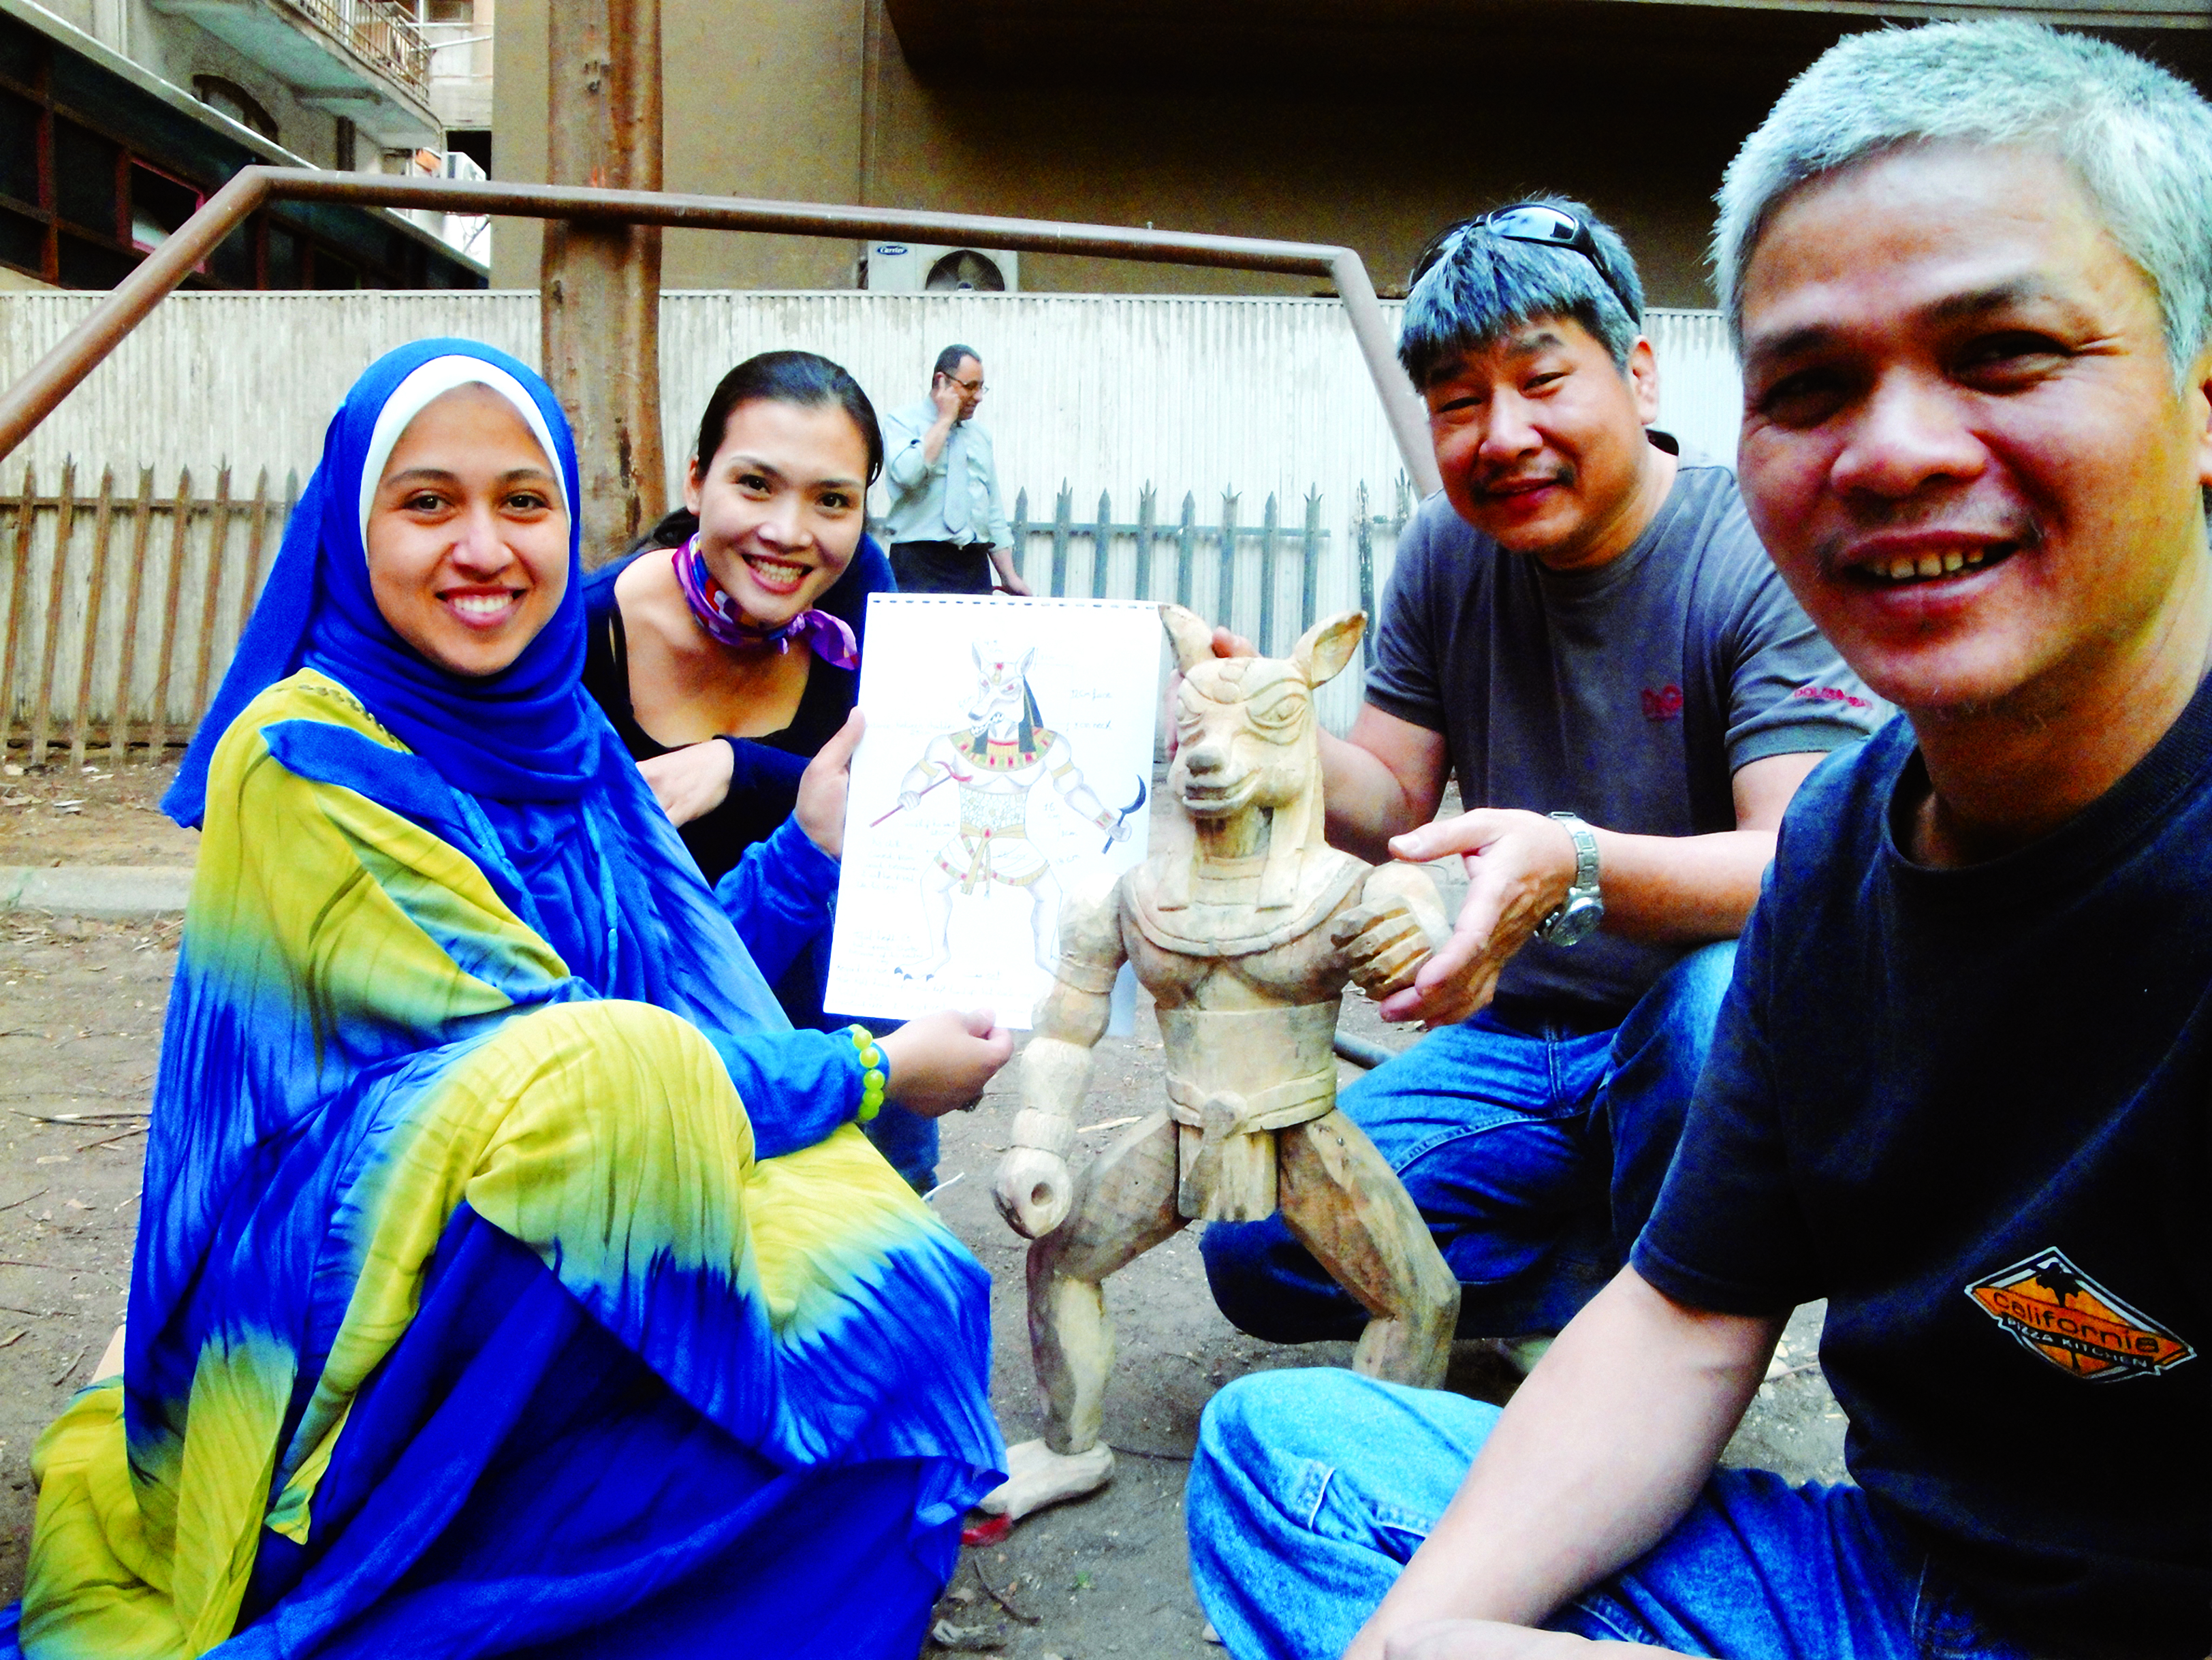 Meet the Egyptian woman bringing Vietnamese water puppetry to Cairo